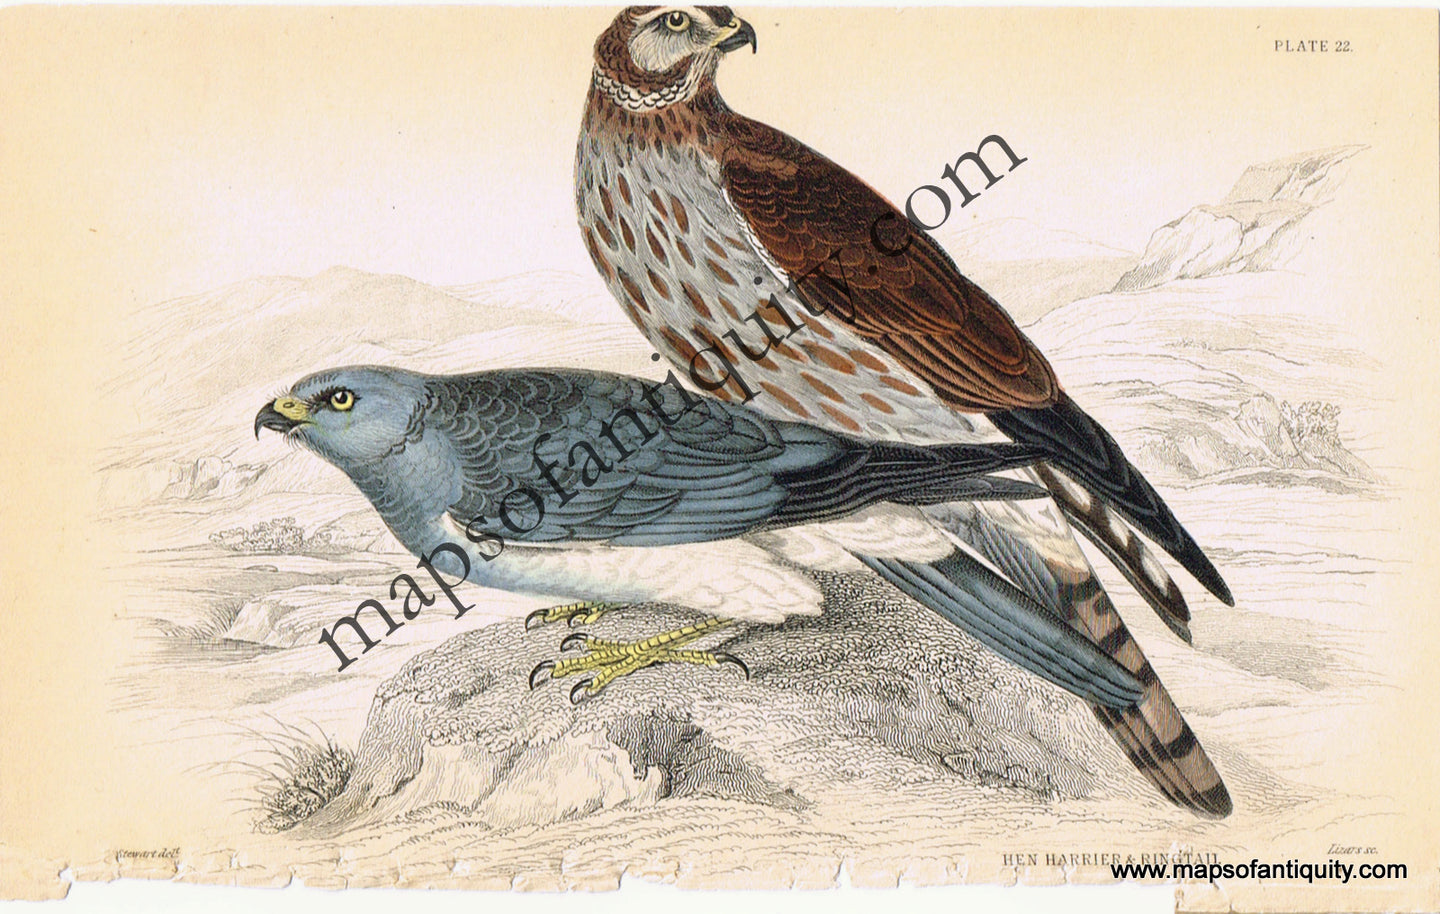 '-Hen-Harrier-Ring-Tail-Pl.-22-Natural-History-Birds-1834-Jardine-Maps-Of-Antiquity